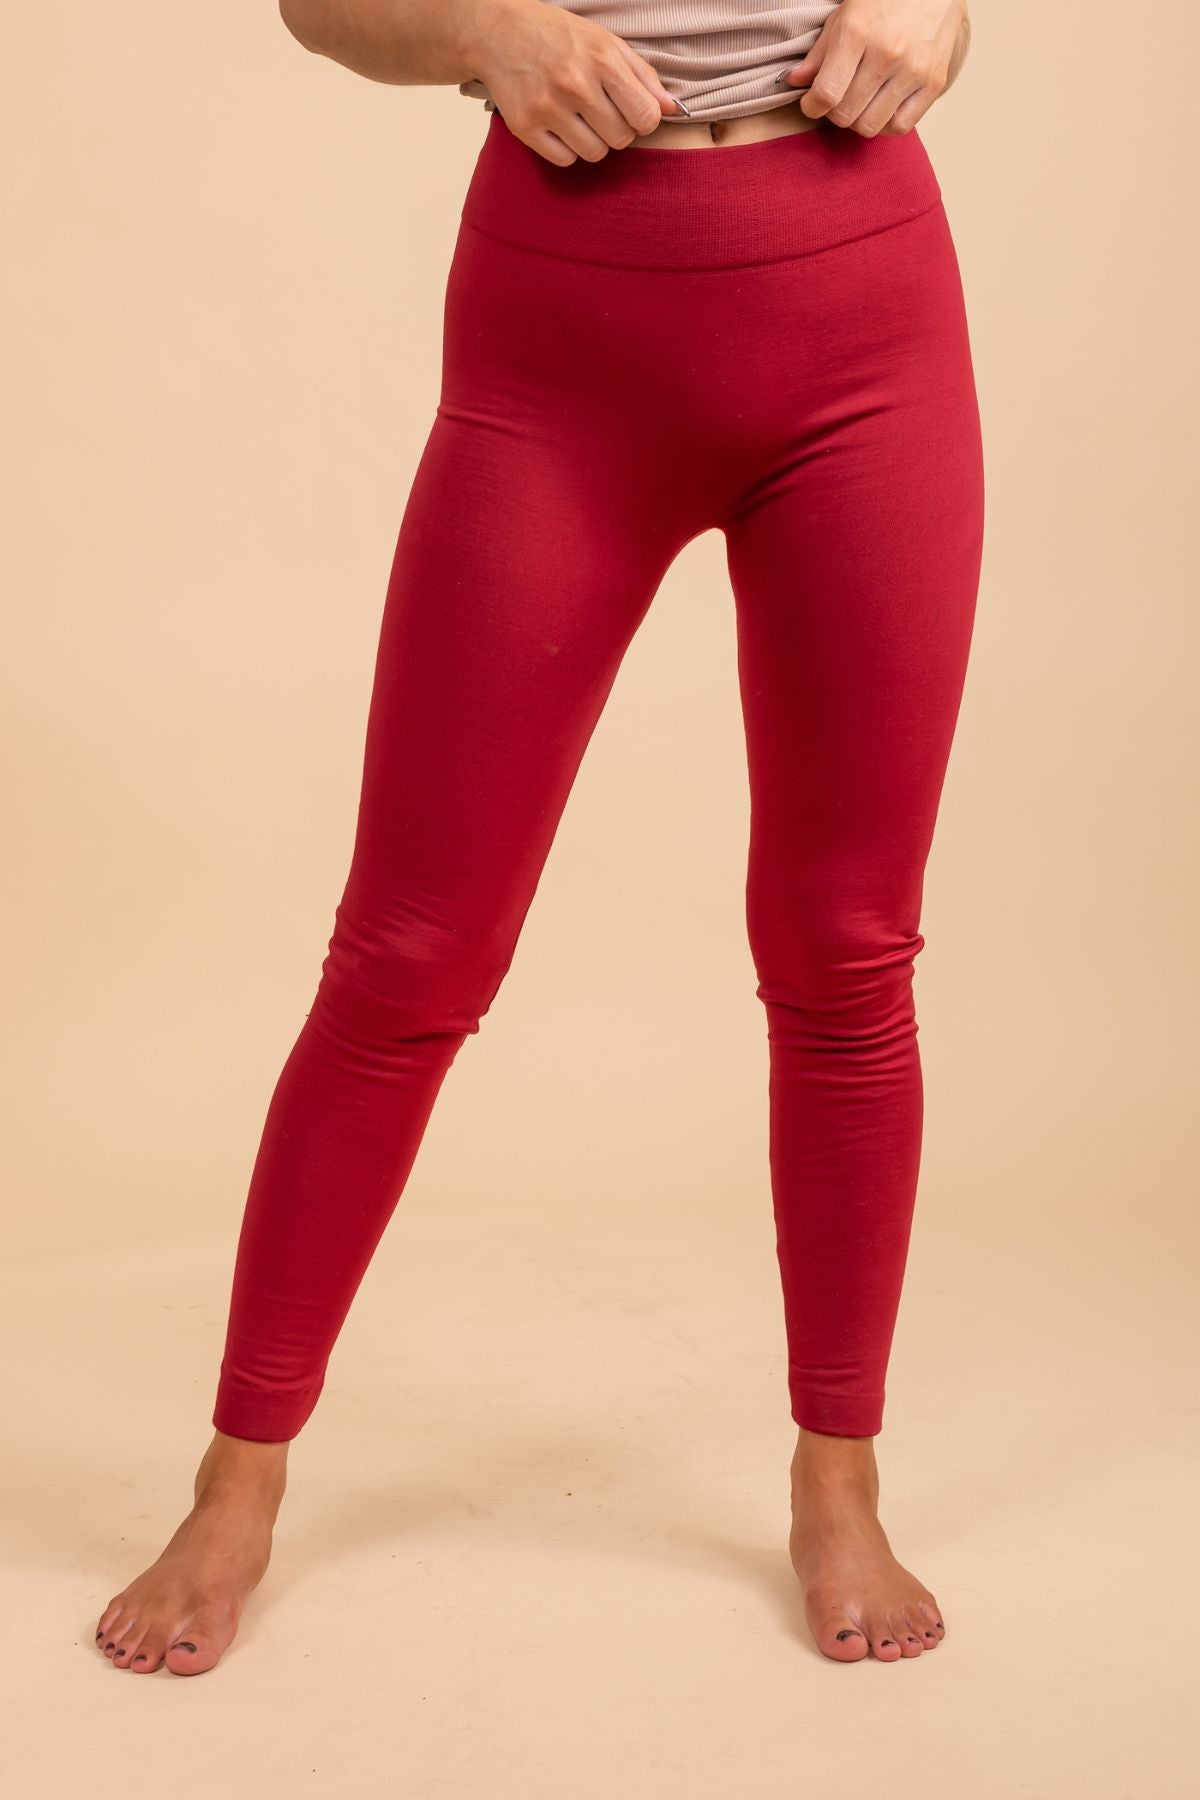 Ann Summers The High Gloss PU Legging Red | very.co.uk